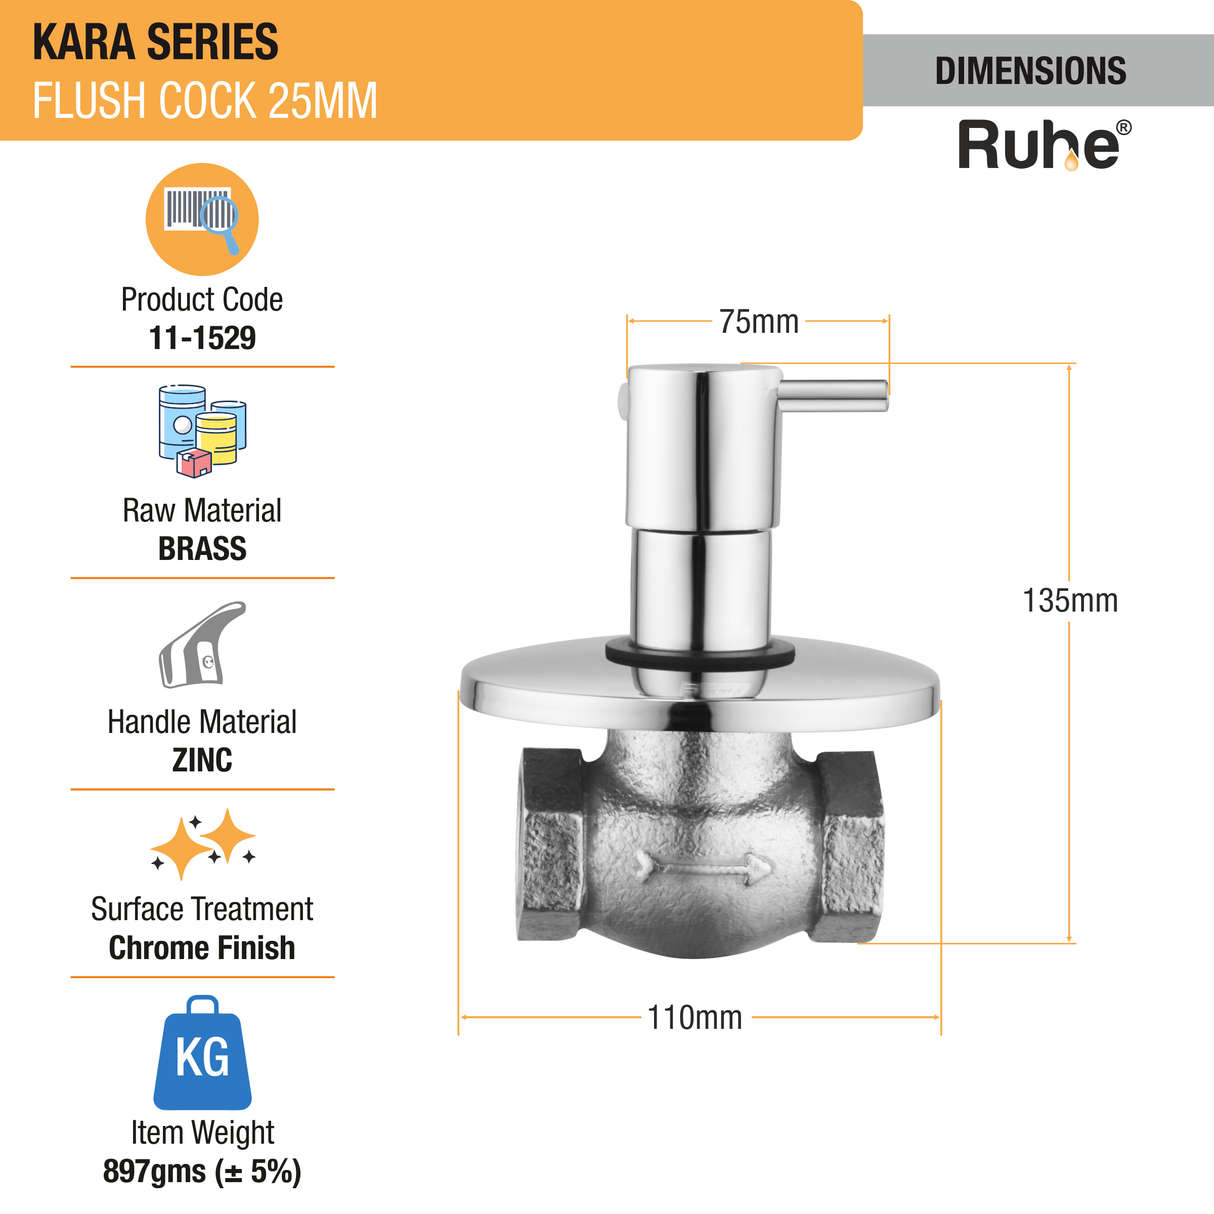 Kara Flush Cock 25mm Faucet dimensions and sizes